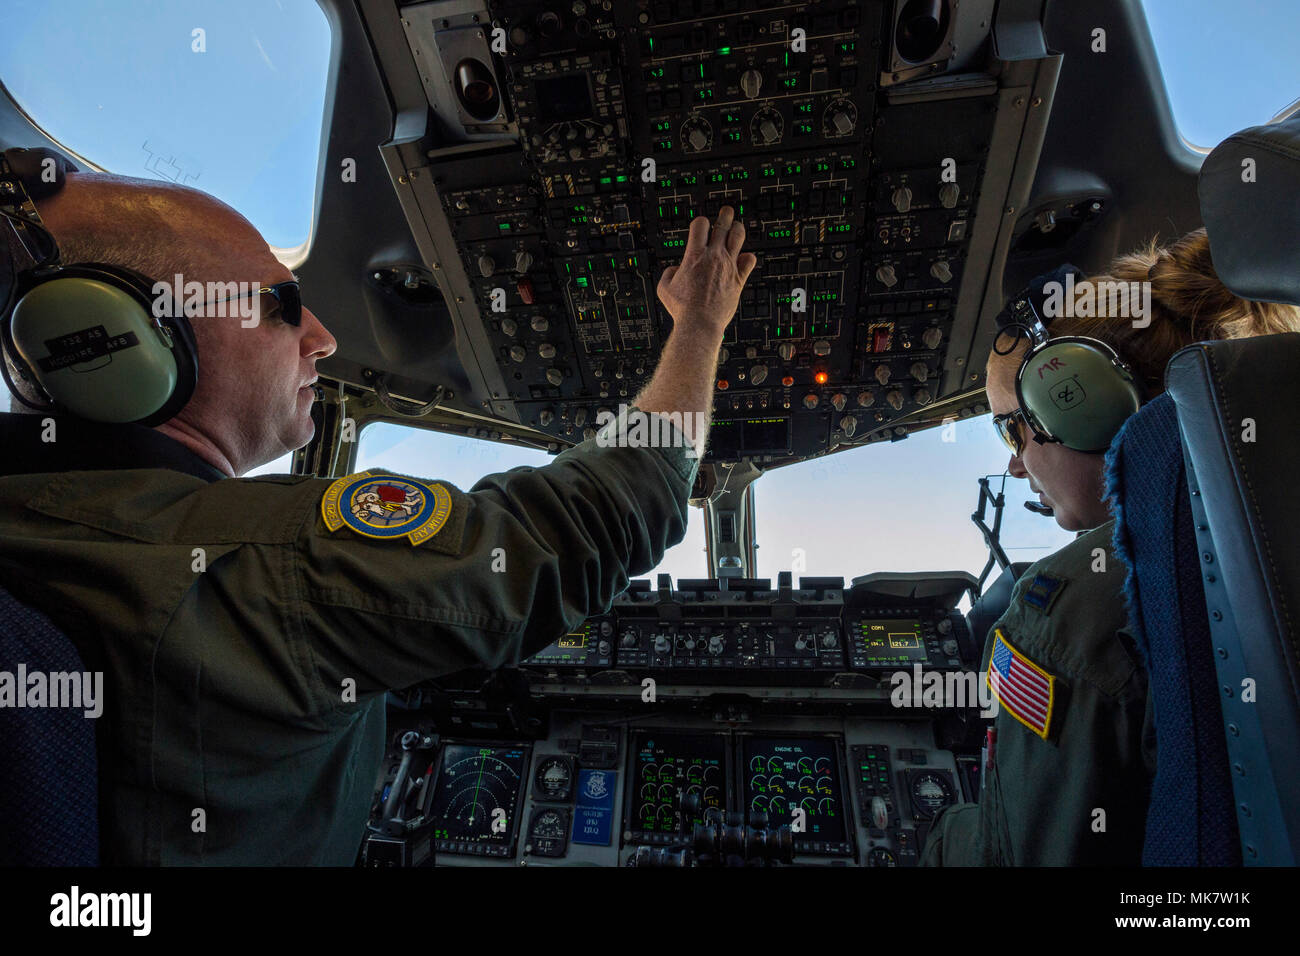 U.S. Air Force Lt. Col. Samuel F. Irvin, left, Commander, 732nd Airlift Squadron, and Capt. Maggie R. Linn, both C-17 Globemaster III Pilots with the 732nd Airlift Squadron, 514th Air Mobility Wing, prepare to land at Joint Base Charleston, S.C., Nov. 17, 2017. The 514th‘s 732nd Airlift Squadron C-17 crew are combining training and a real world Denton Program humanitarian mission bringing 76,410 pounds of food to the Republic of Haiti. The 514th is located at Joint Base McGuire-Dix-Lakehurst, N.J. (U.S. Air Force photo by Master Sgt. Mark C. Olsen) Stock Photo